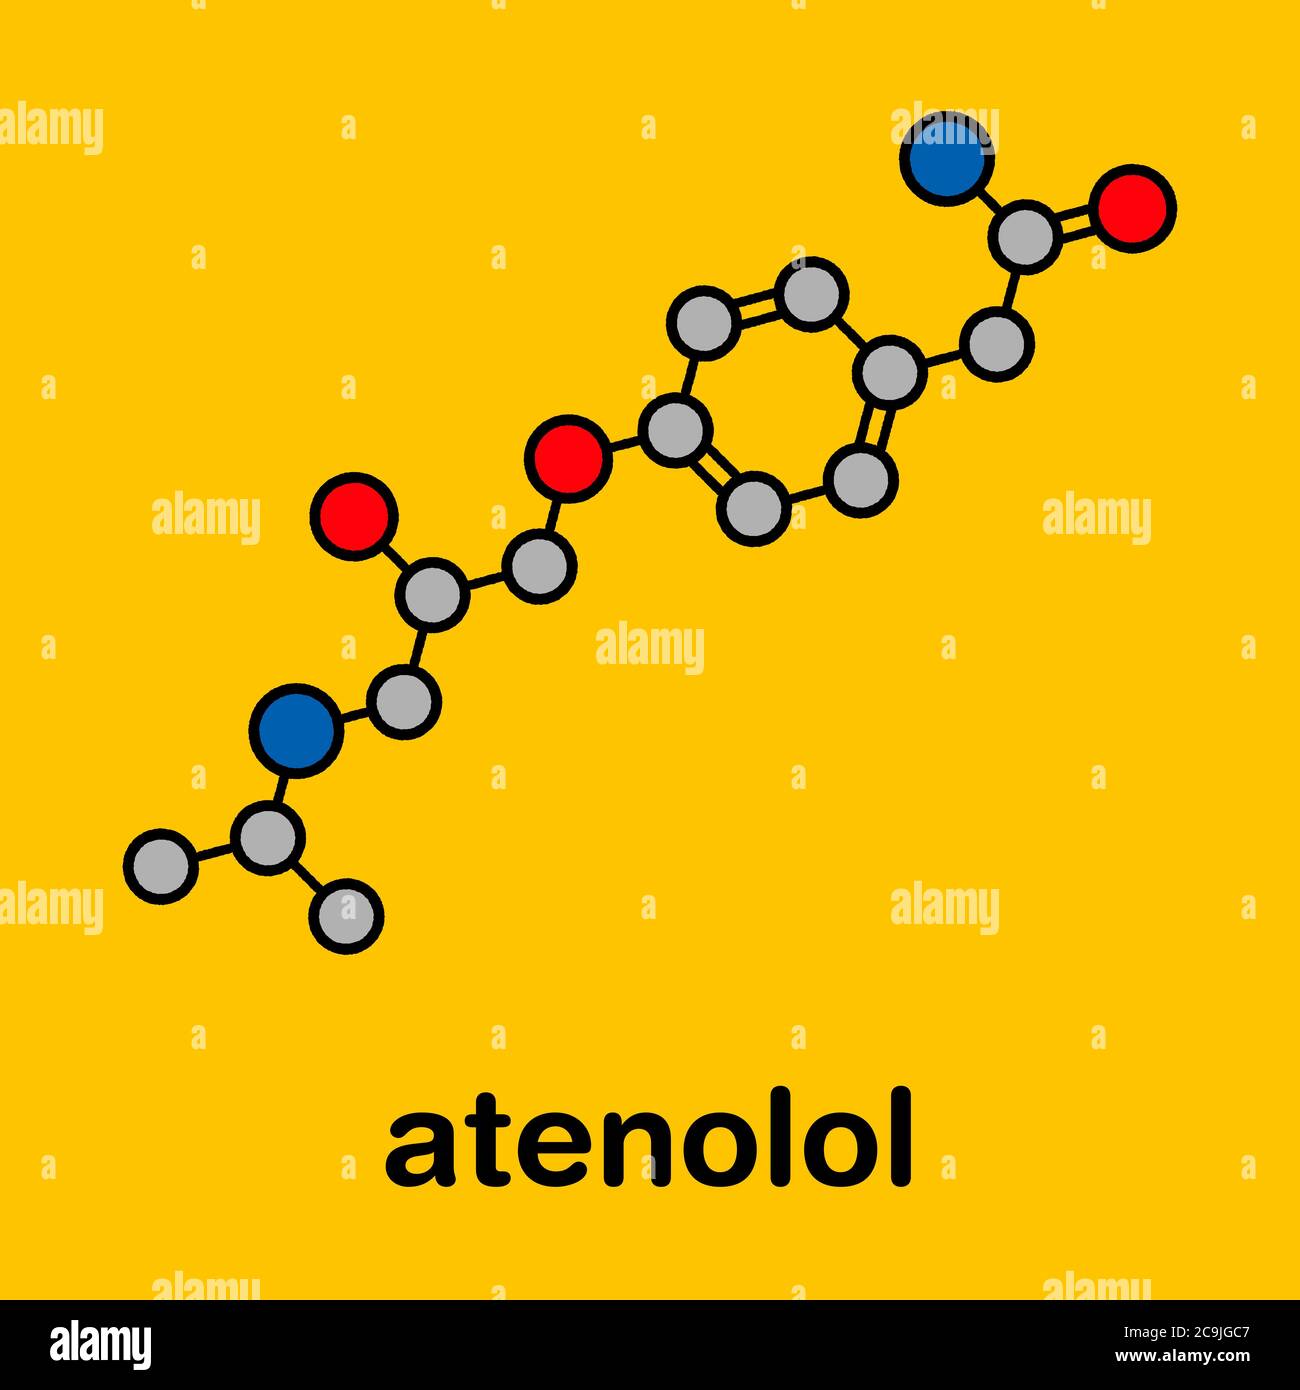 Atenolol hypertension or high blood pressure drug (beta blocker) molecule. Stylized skeletal formula (chemical structure). Atoms are shown as color-co Stock Photo